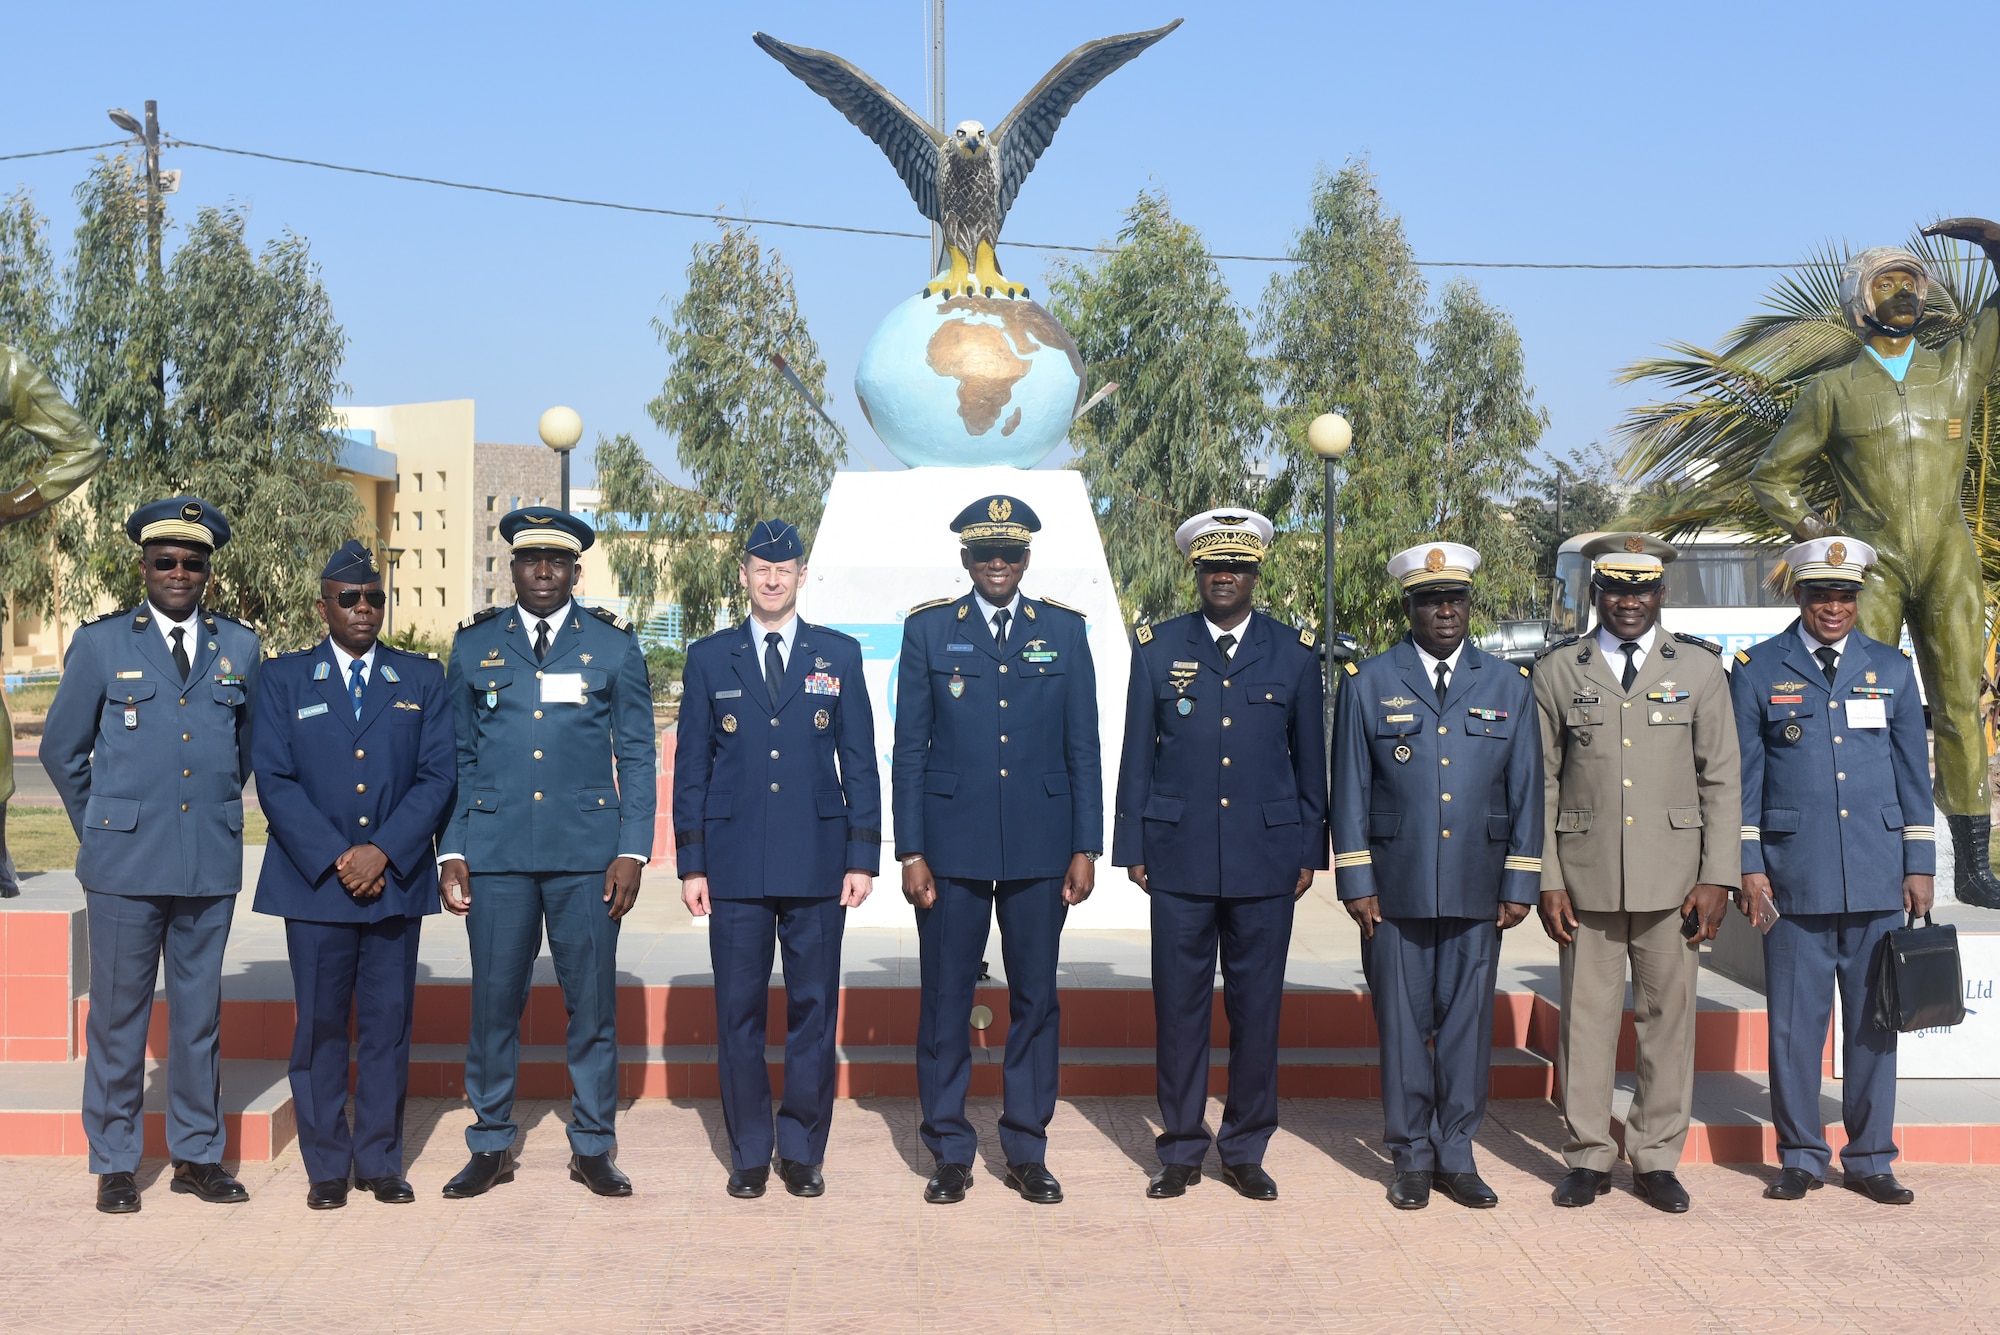 Distinguished visitors from participating African countries pose for a photo after the opening ceremony of African Partnership Flight Senegal at Captain Andalla Cissé Air Base, Senegal, March 19, 2018.  The purpose of APF Senegal is to conduct multilateral, military-to-military engagements and security assistance with African air forces. (U.S. Air Force photo by Airman 1st Class Eli Chevalier)